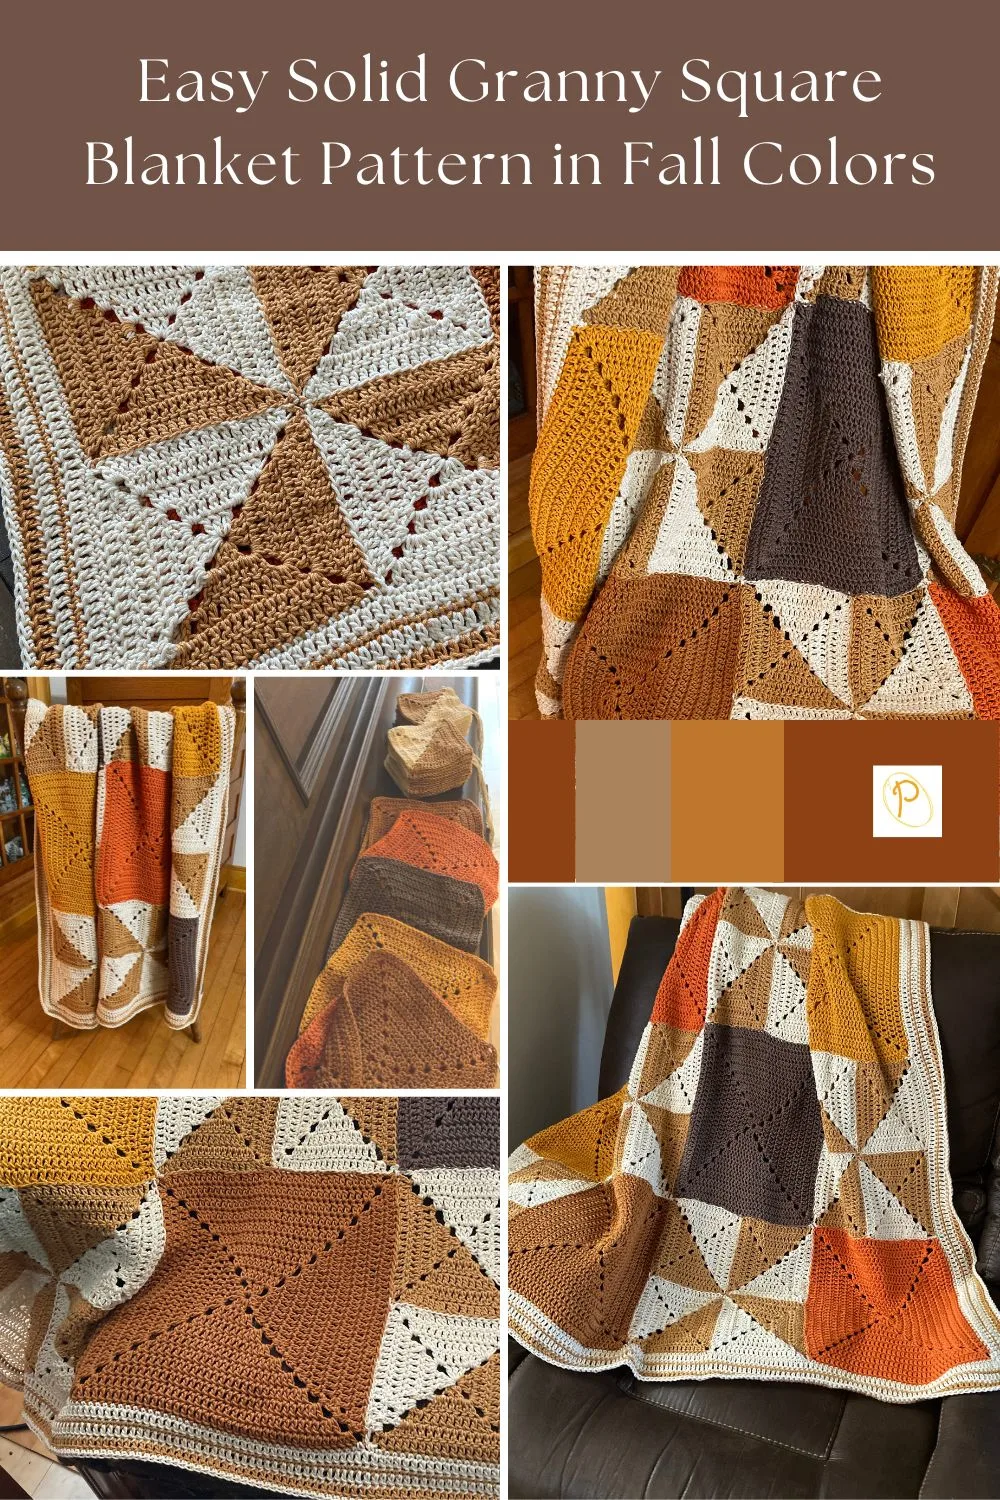 Easy Solid Granny Square Blanket Pattern in Fall Colors